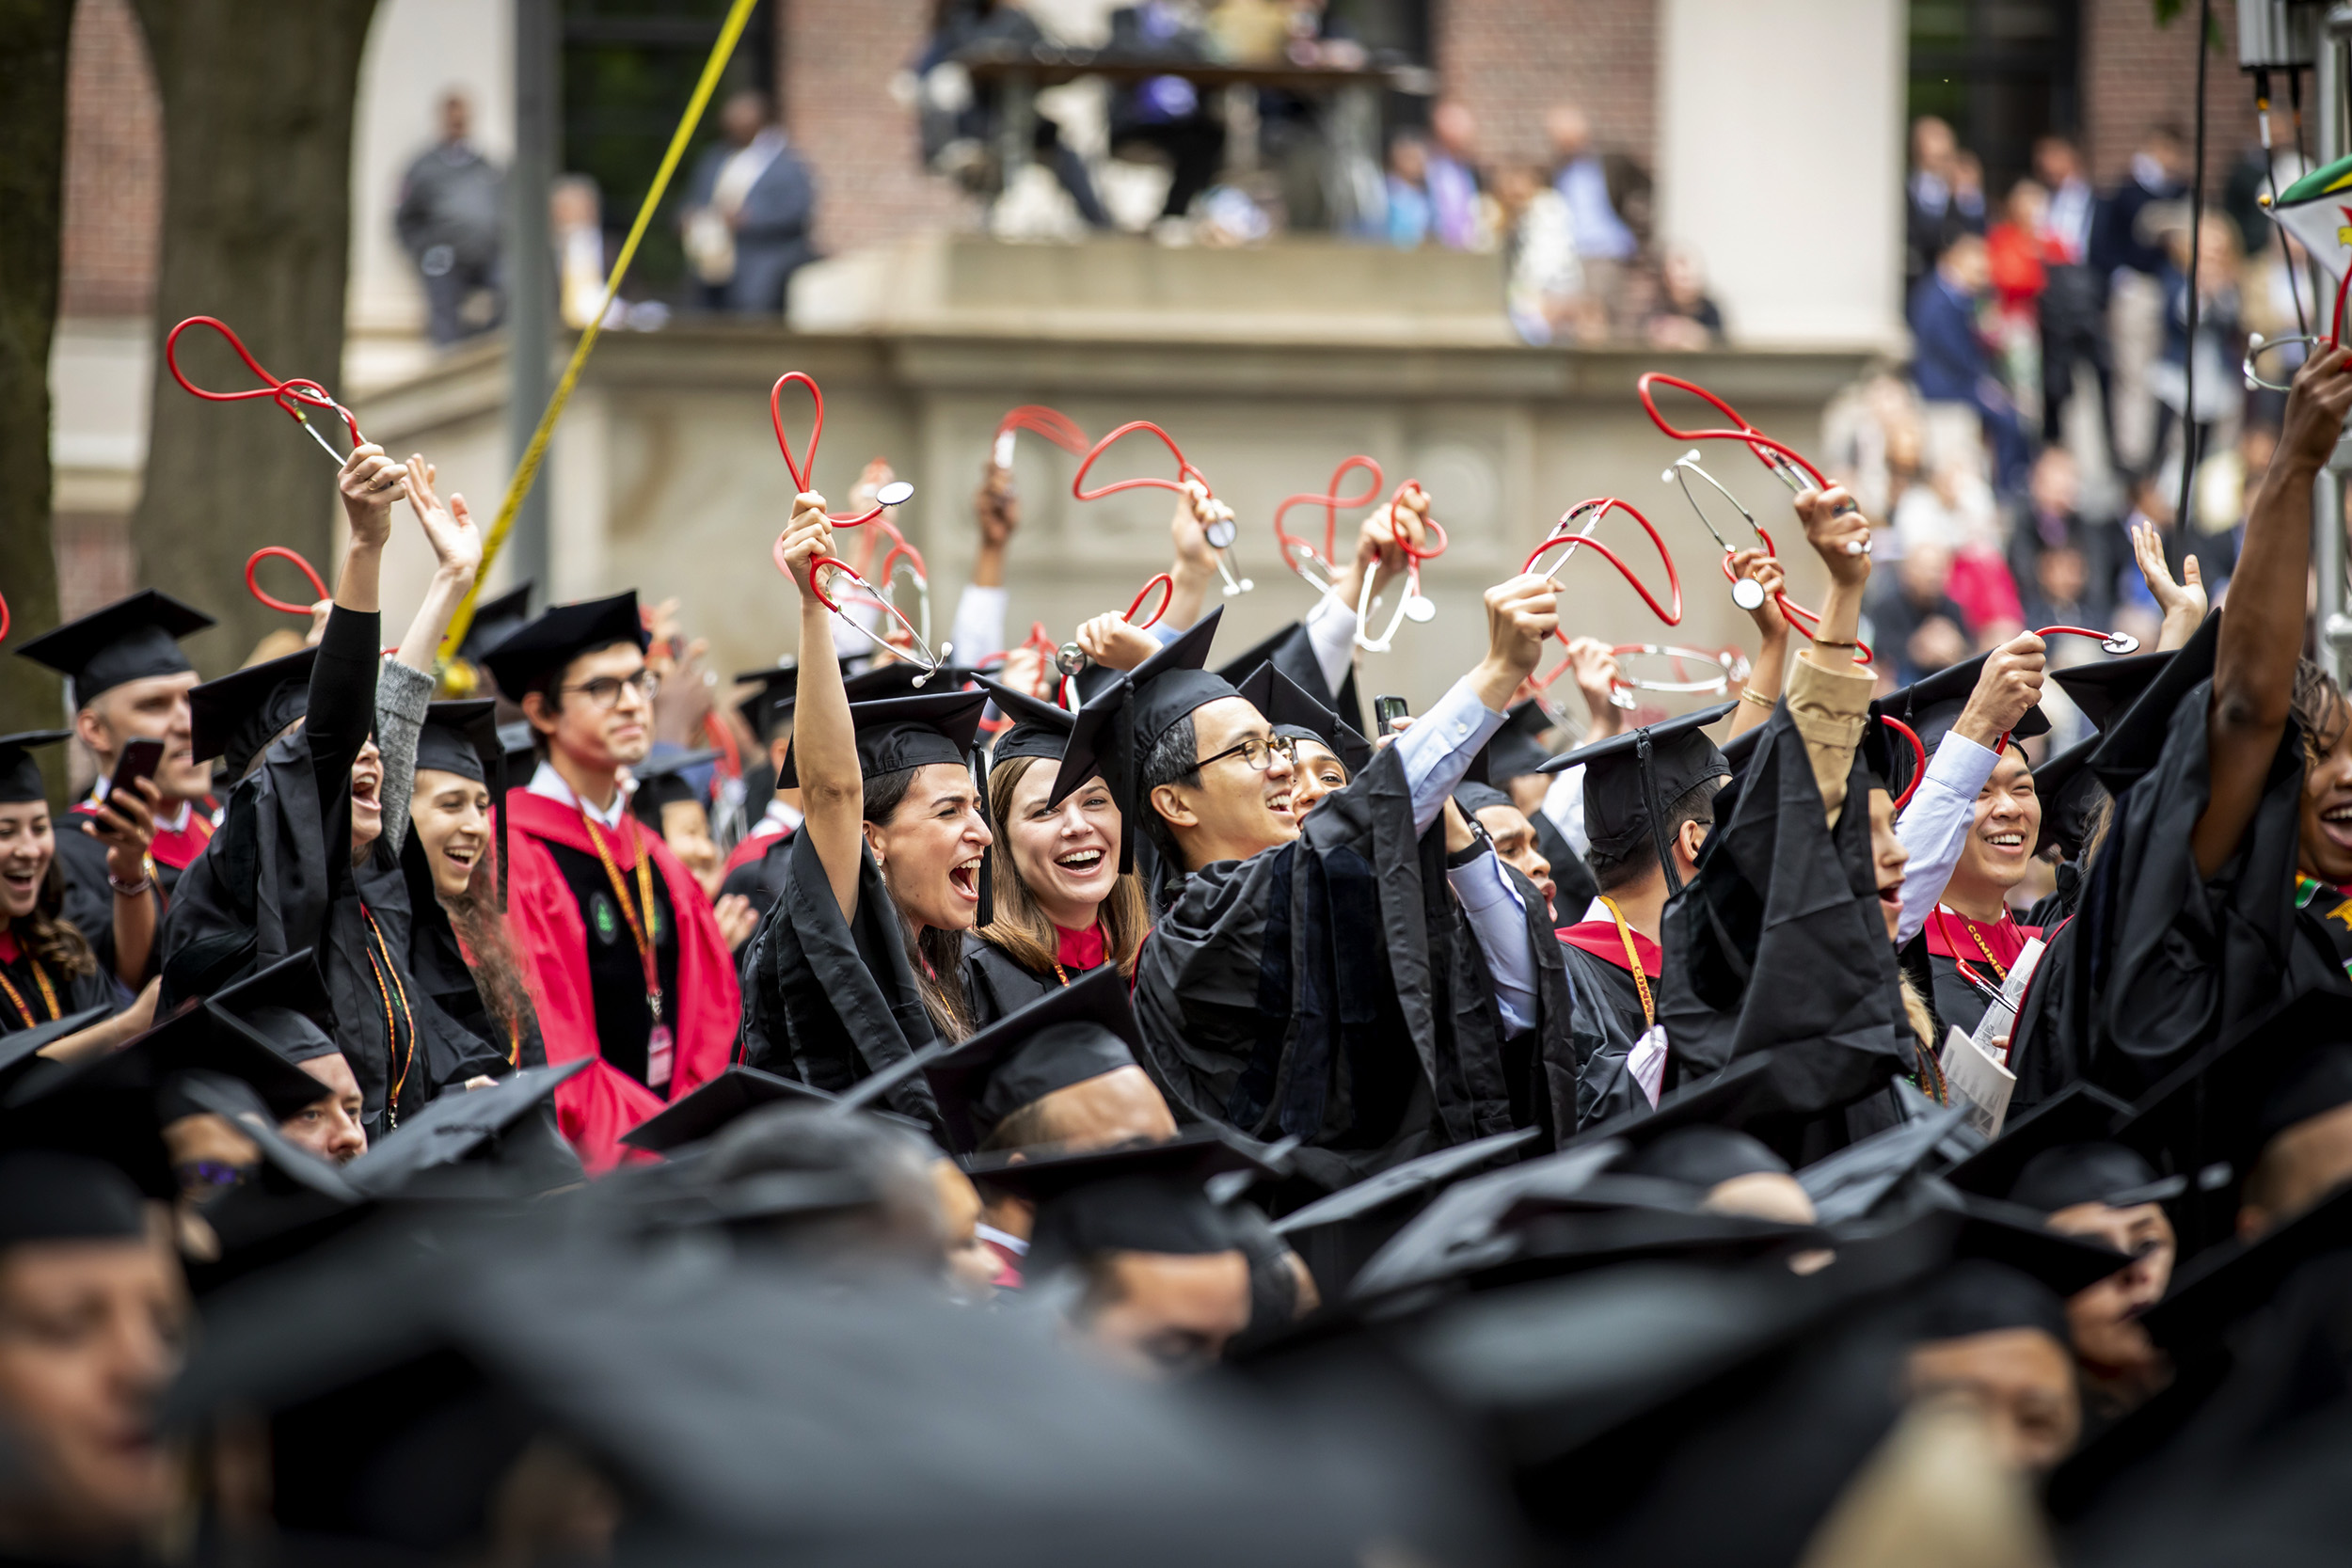 Graduates from Harvard Medical School wave stethoscopes in the air.